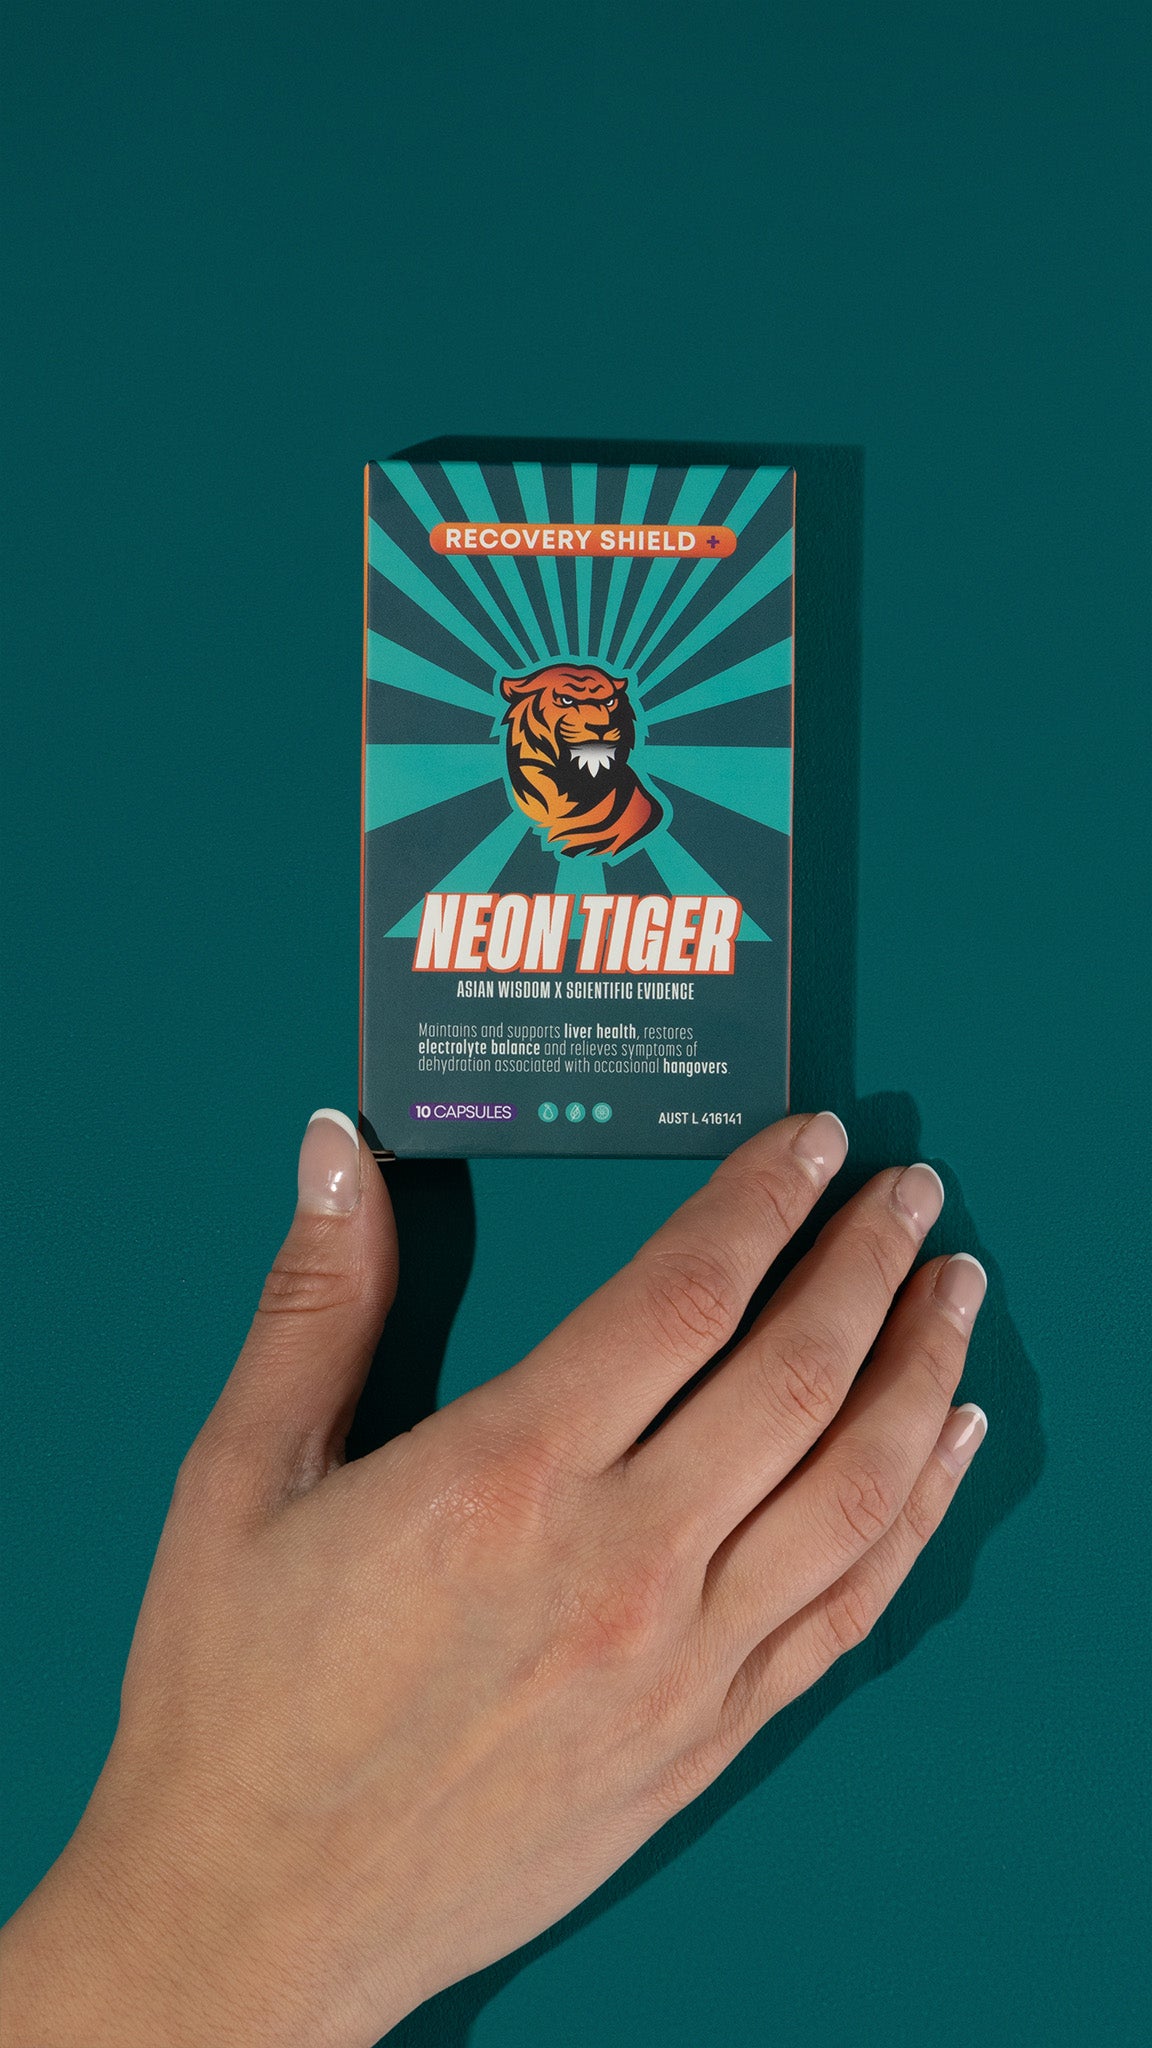 Neon Tiger Recovery Shield + Hangover Prevention